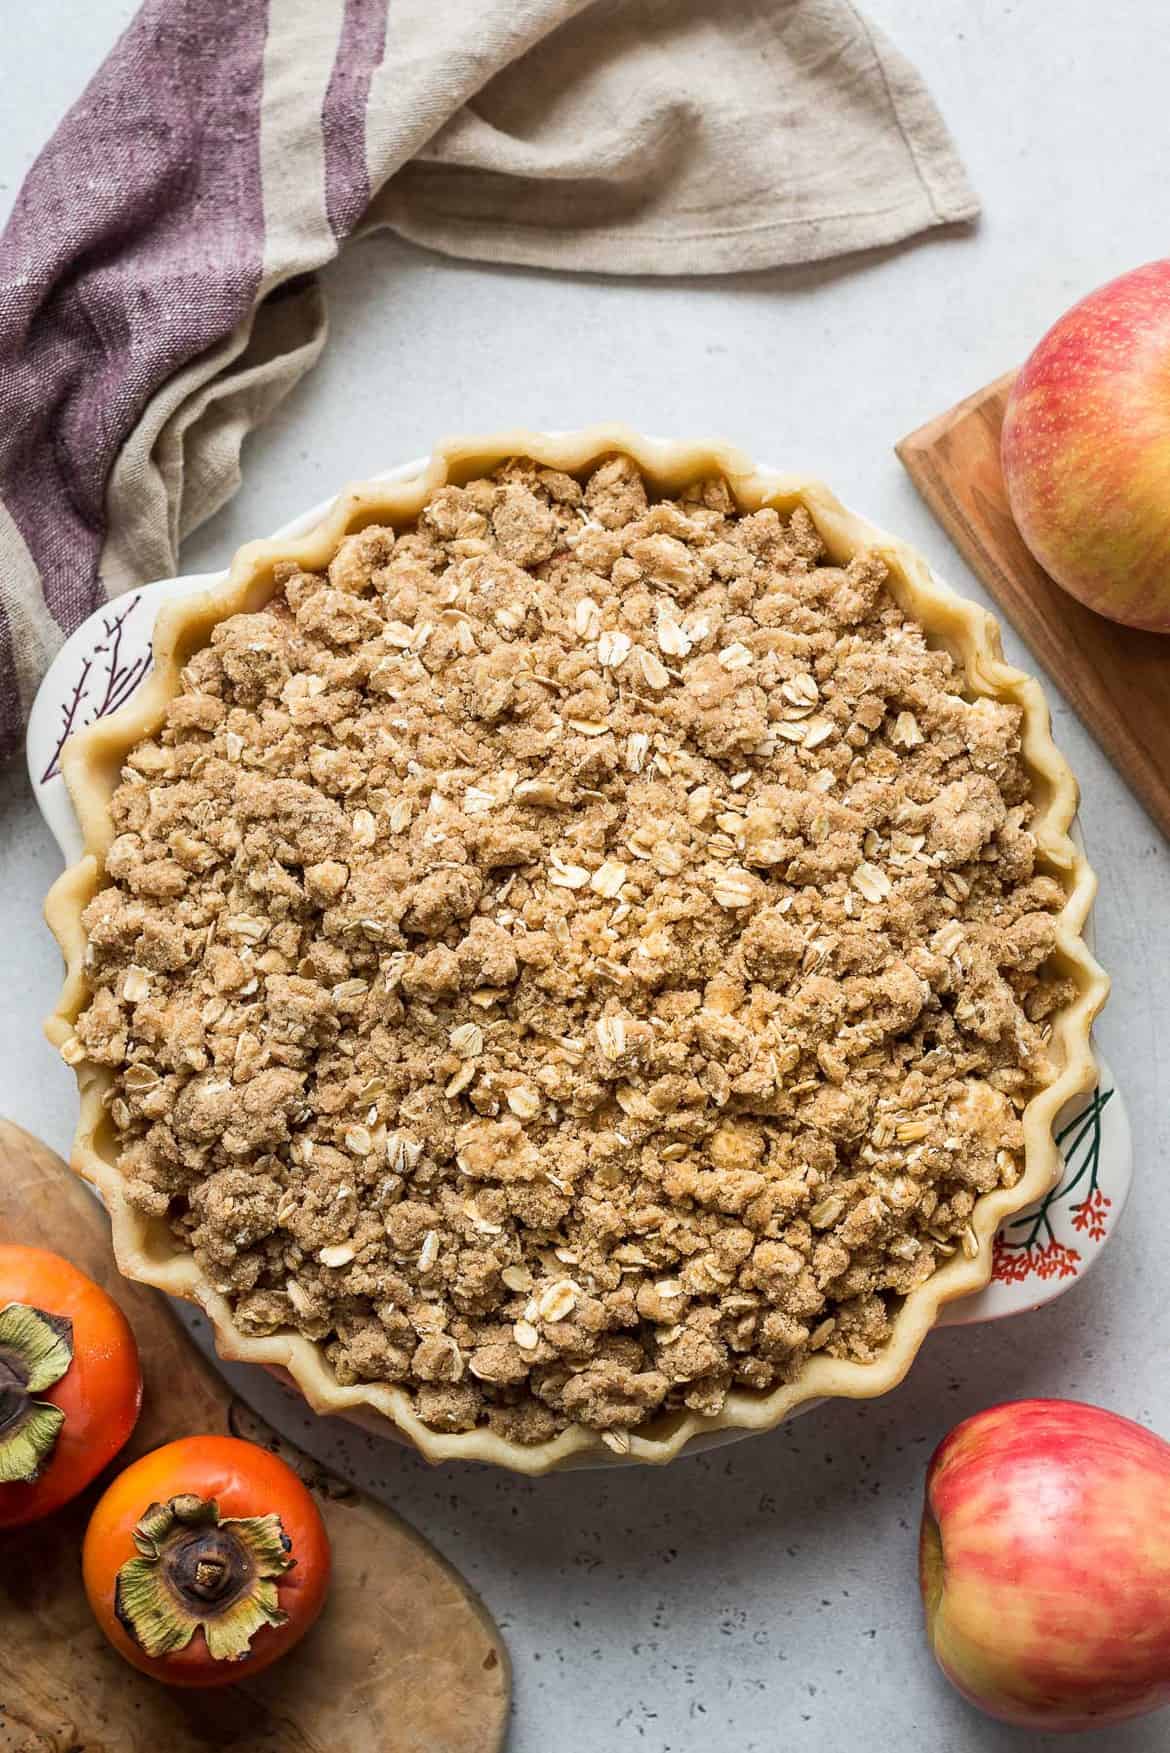 Chopped persimmons and apples under sweet oat streusel in a pie plate ready to bake.